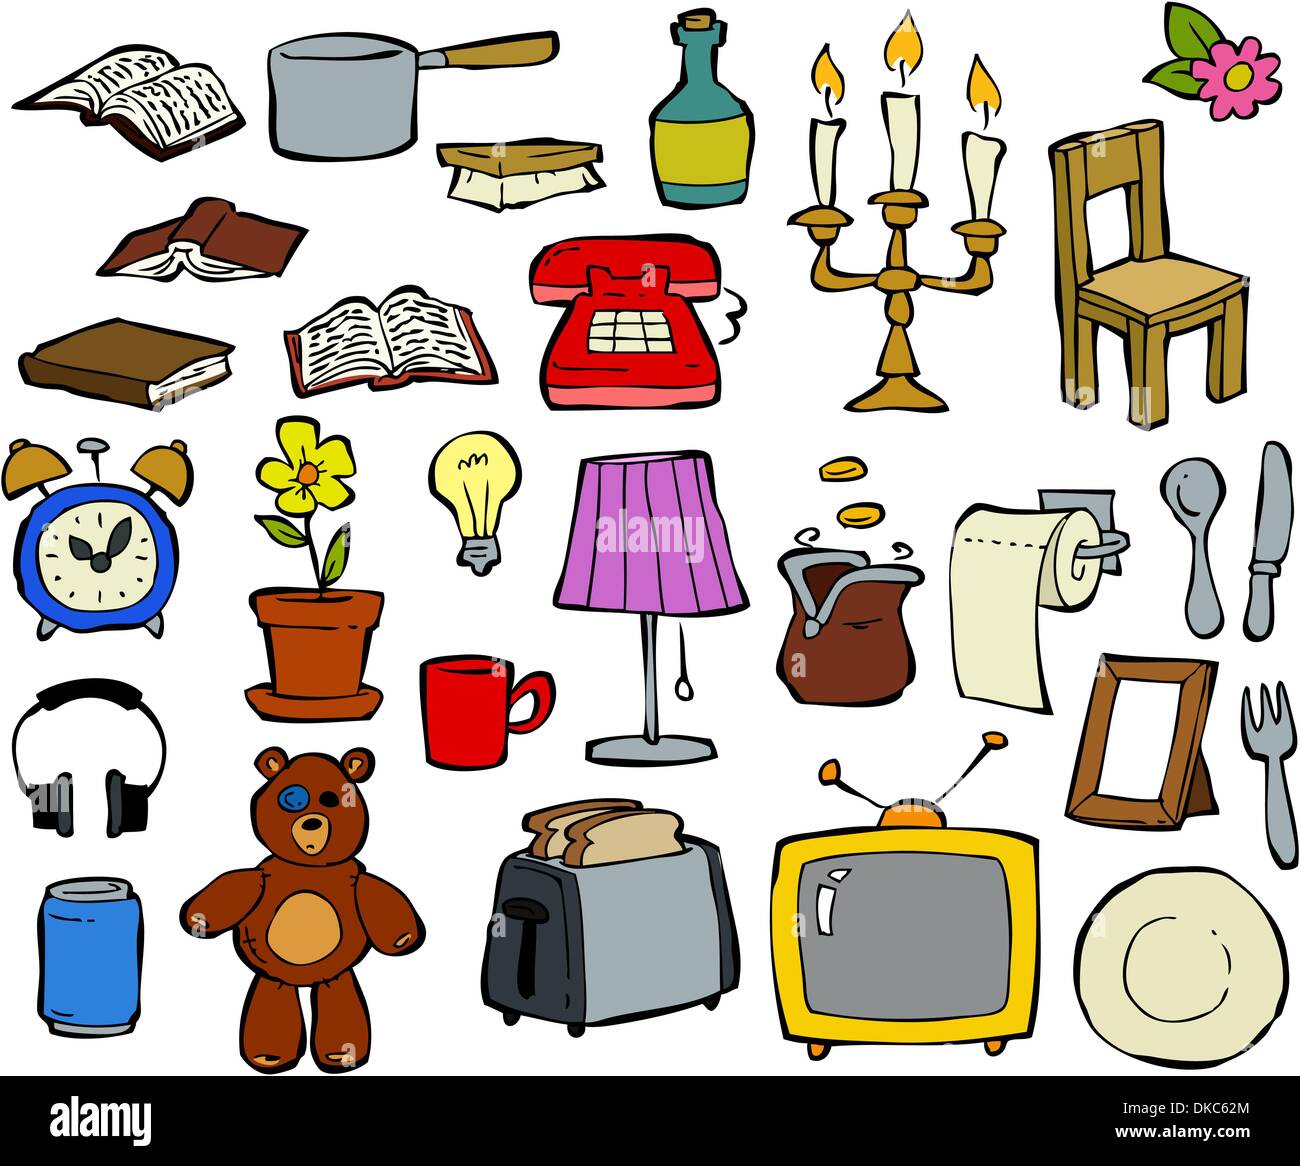 Household items doodle design elements vector illustration Stock